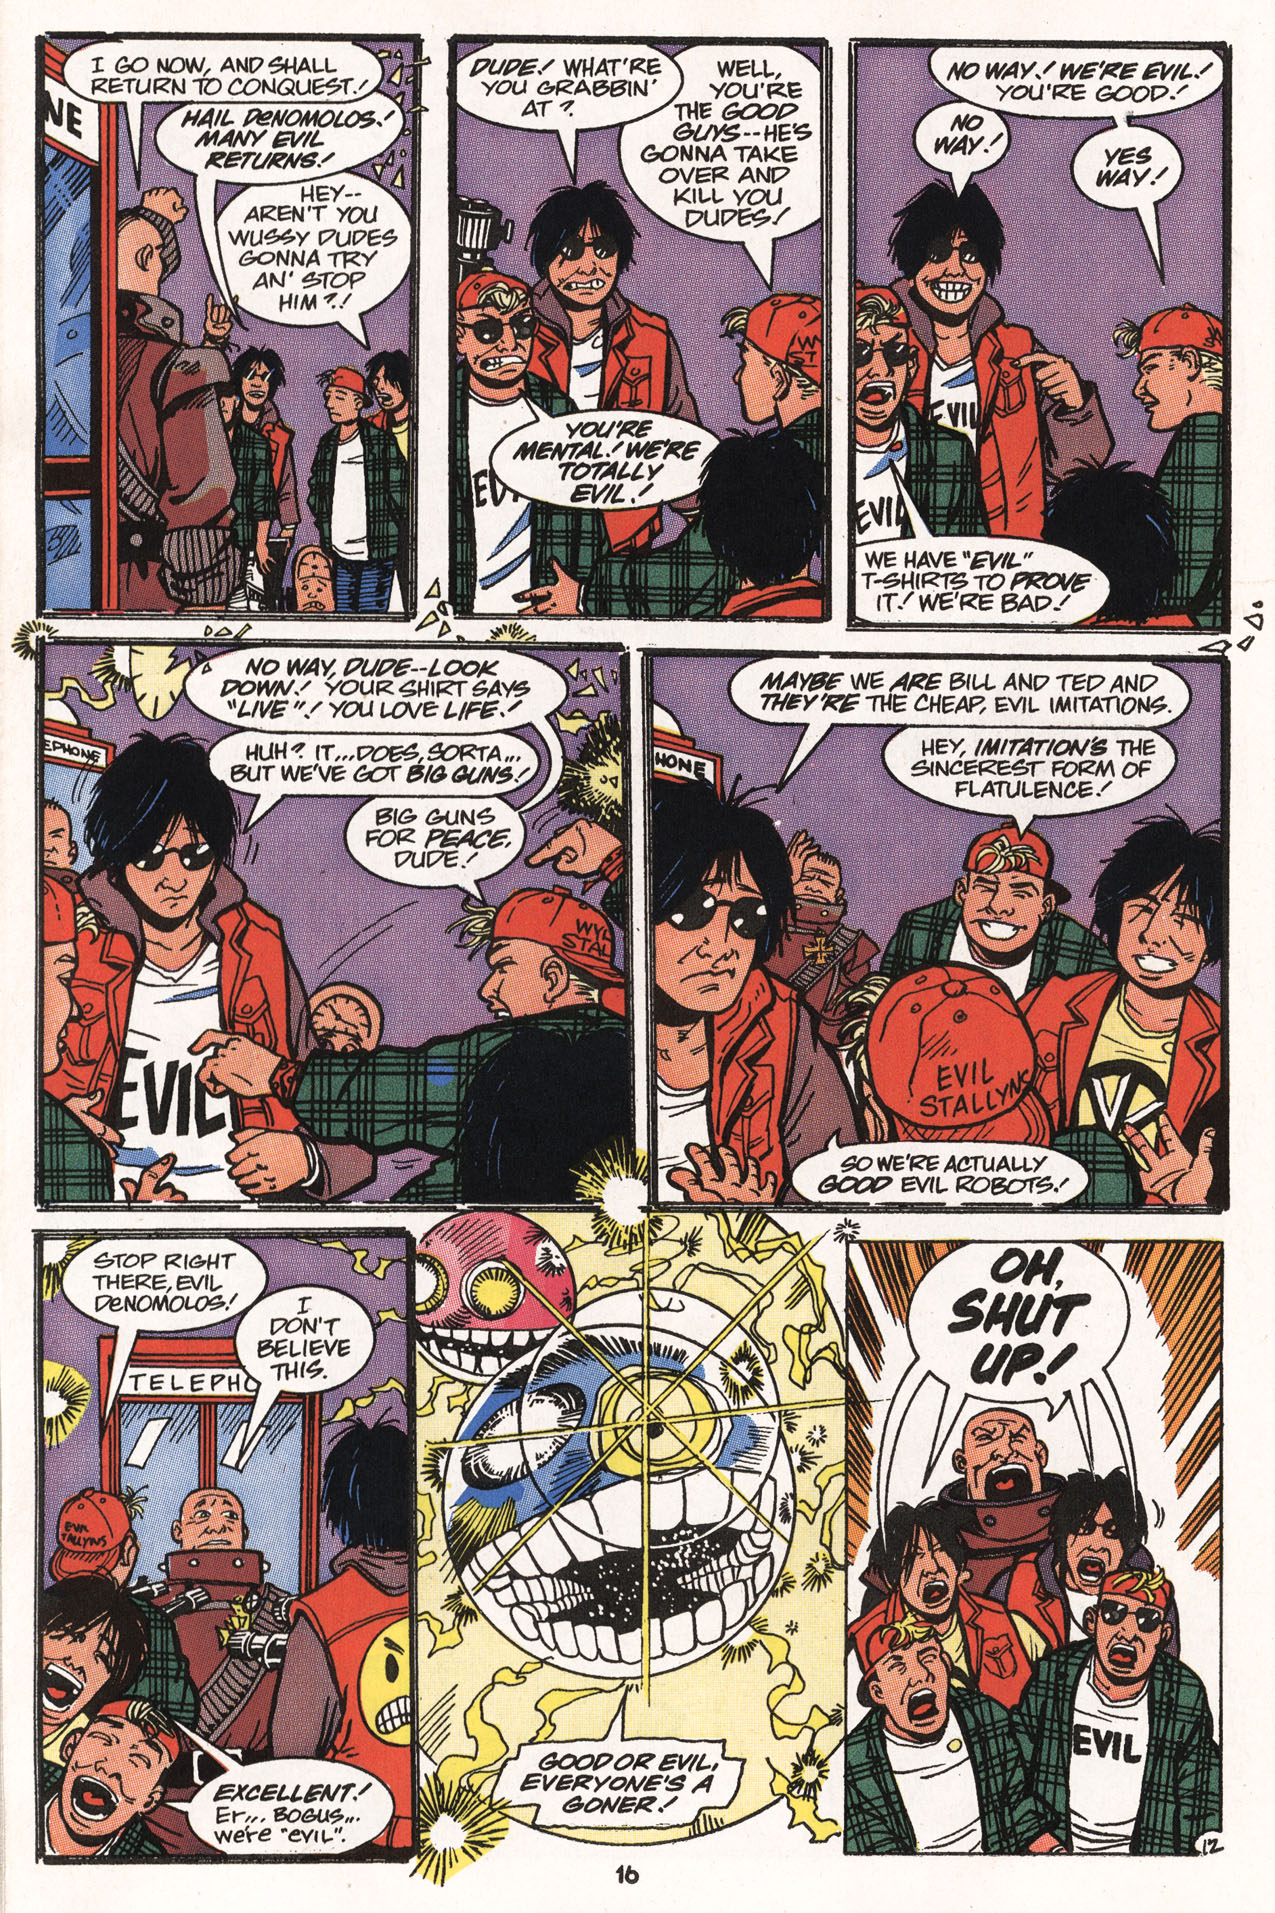 Read online Bill & Ted's Excellent Comic Book comic -  Issue #7 - 18